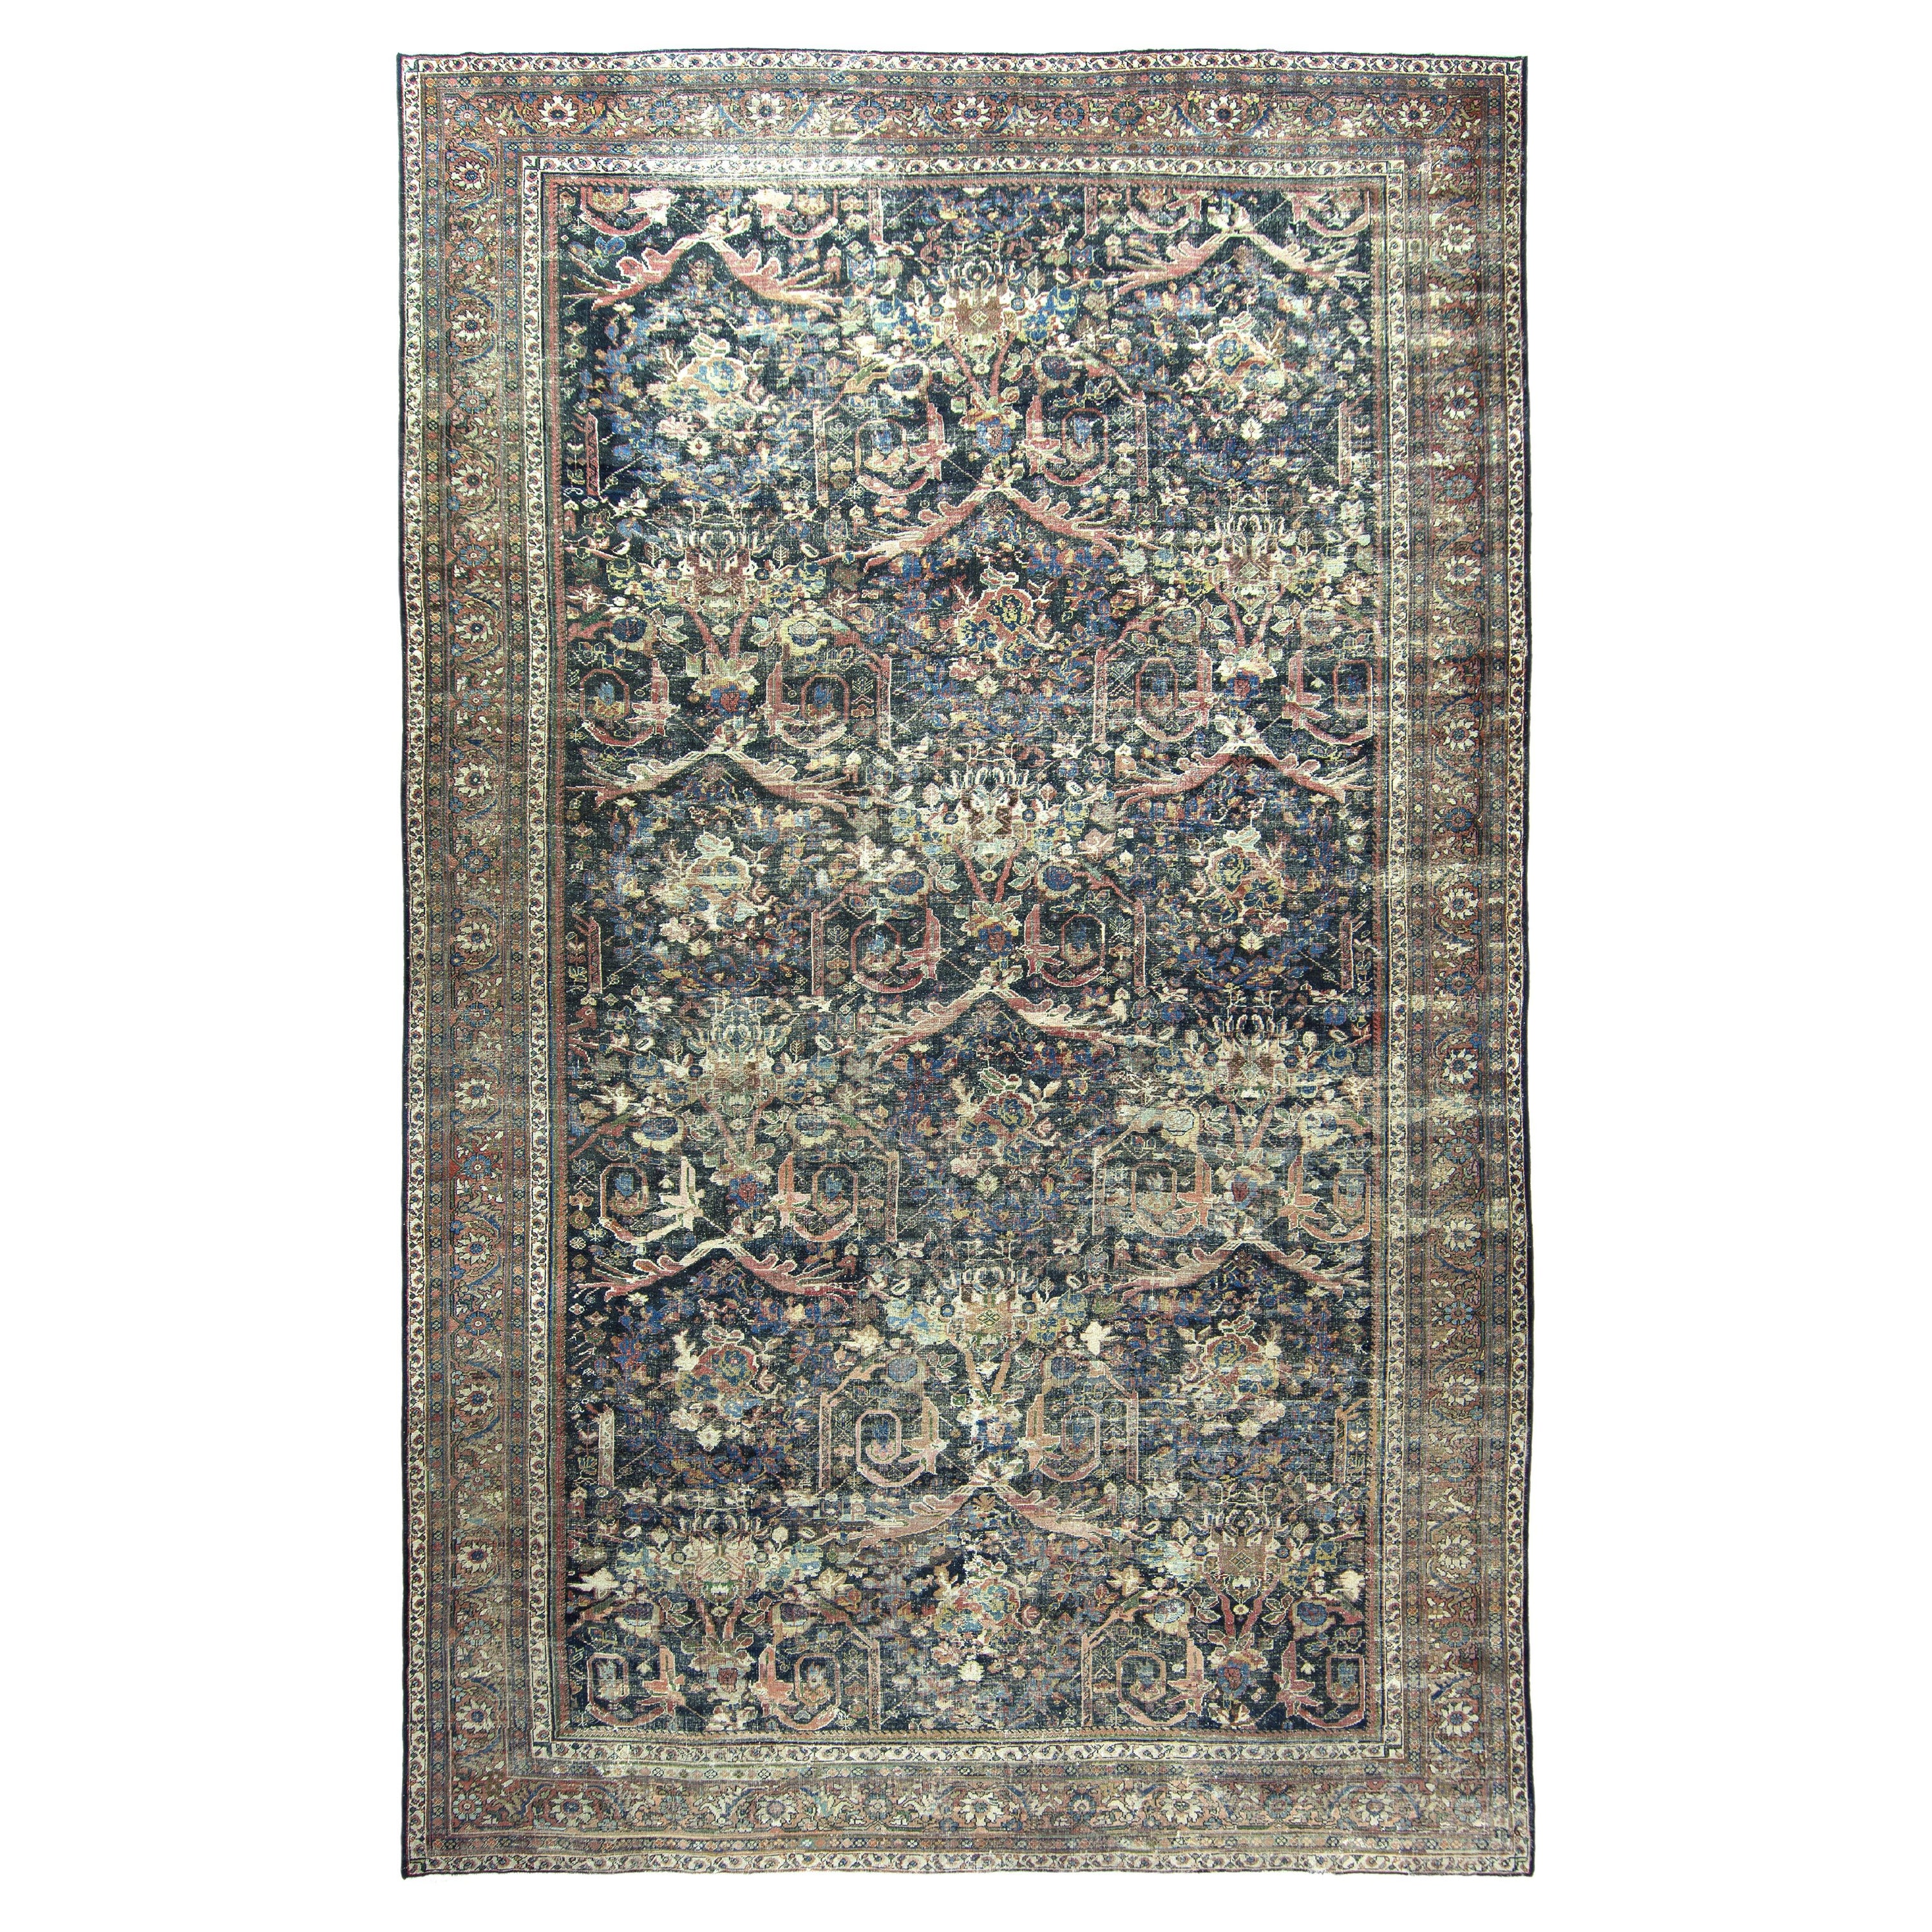 Antique Persian Mahal Rug 28431 For Sale